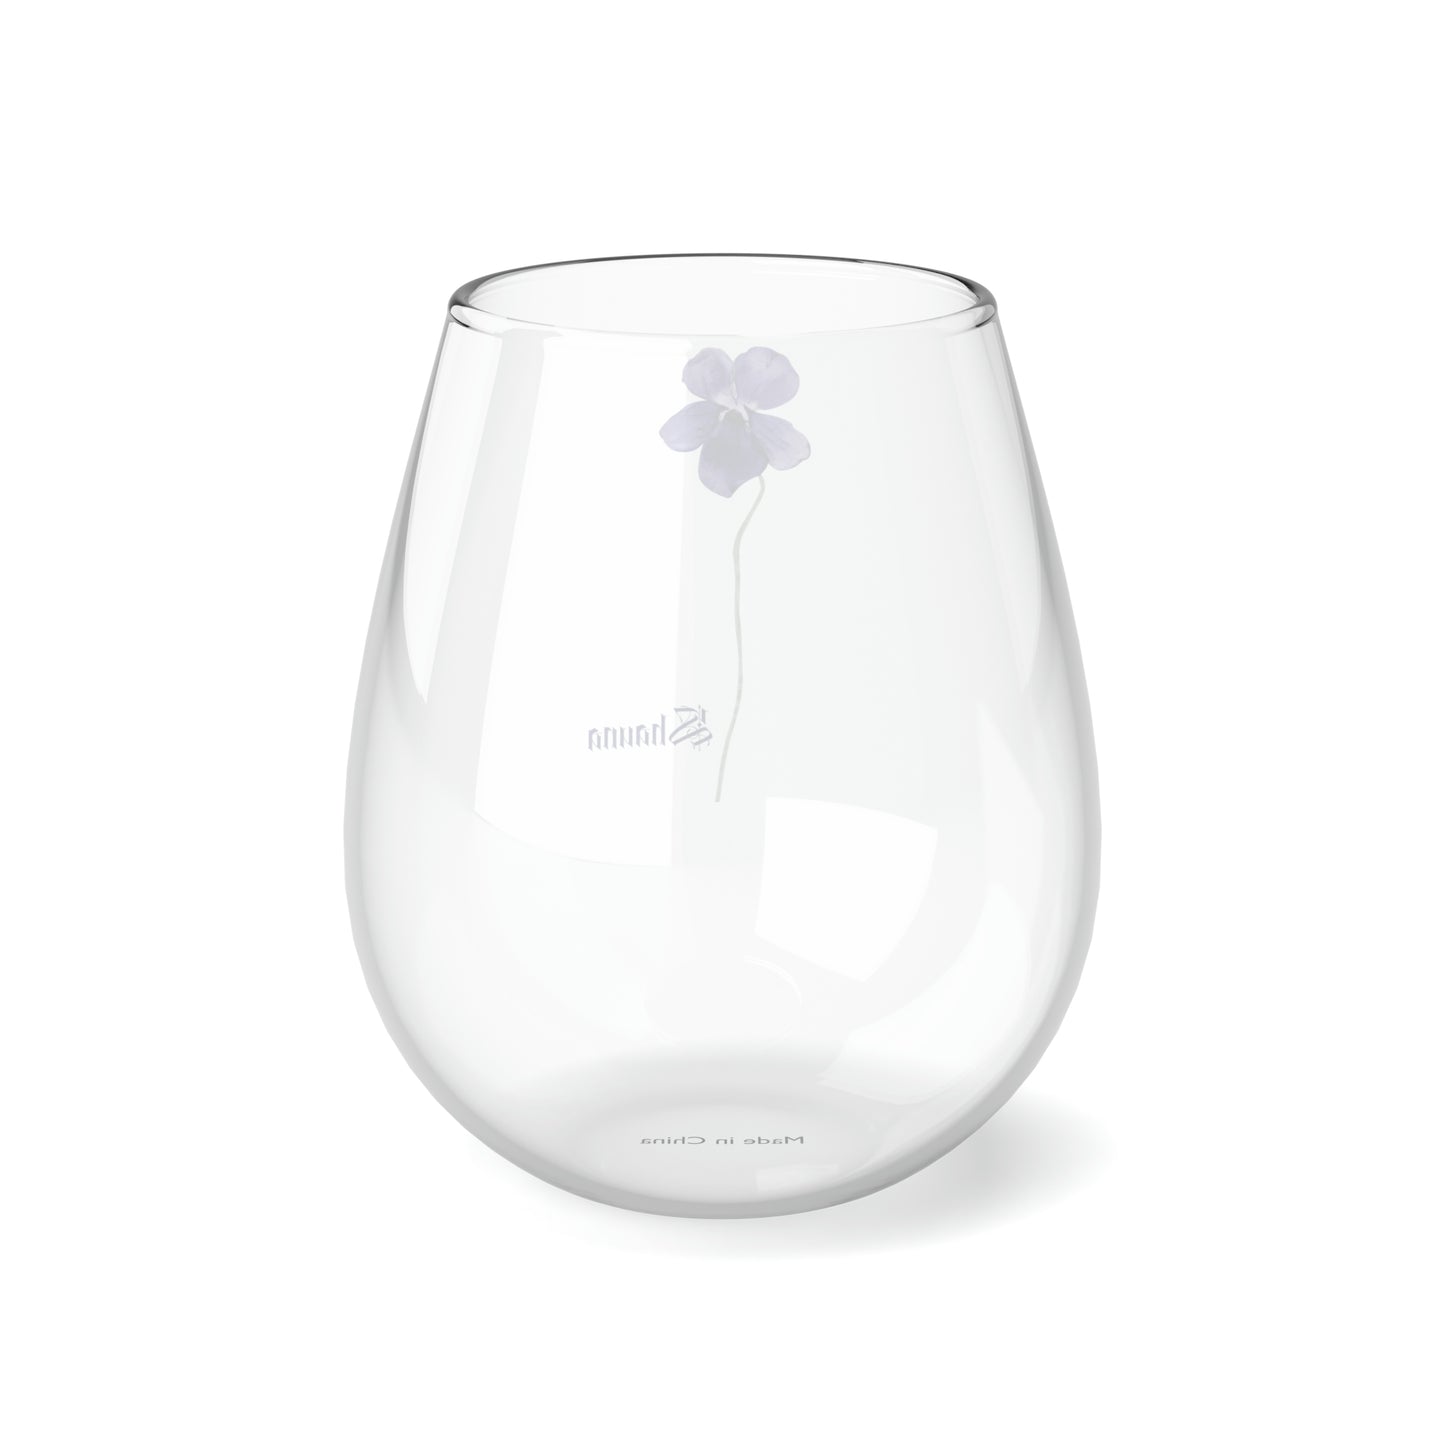 February PERSONALIZED Birth Flower Wine Glass, Birth Flower Gifts, Birth Flower wine glass, Birth Flower Gifts for Women, Gift for coworker, sister gift, birthday gift, Valentine gift, Stemless Wine Glass, 11.75oz